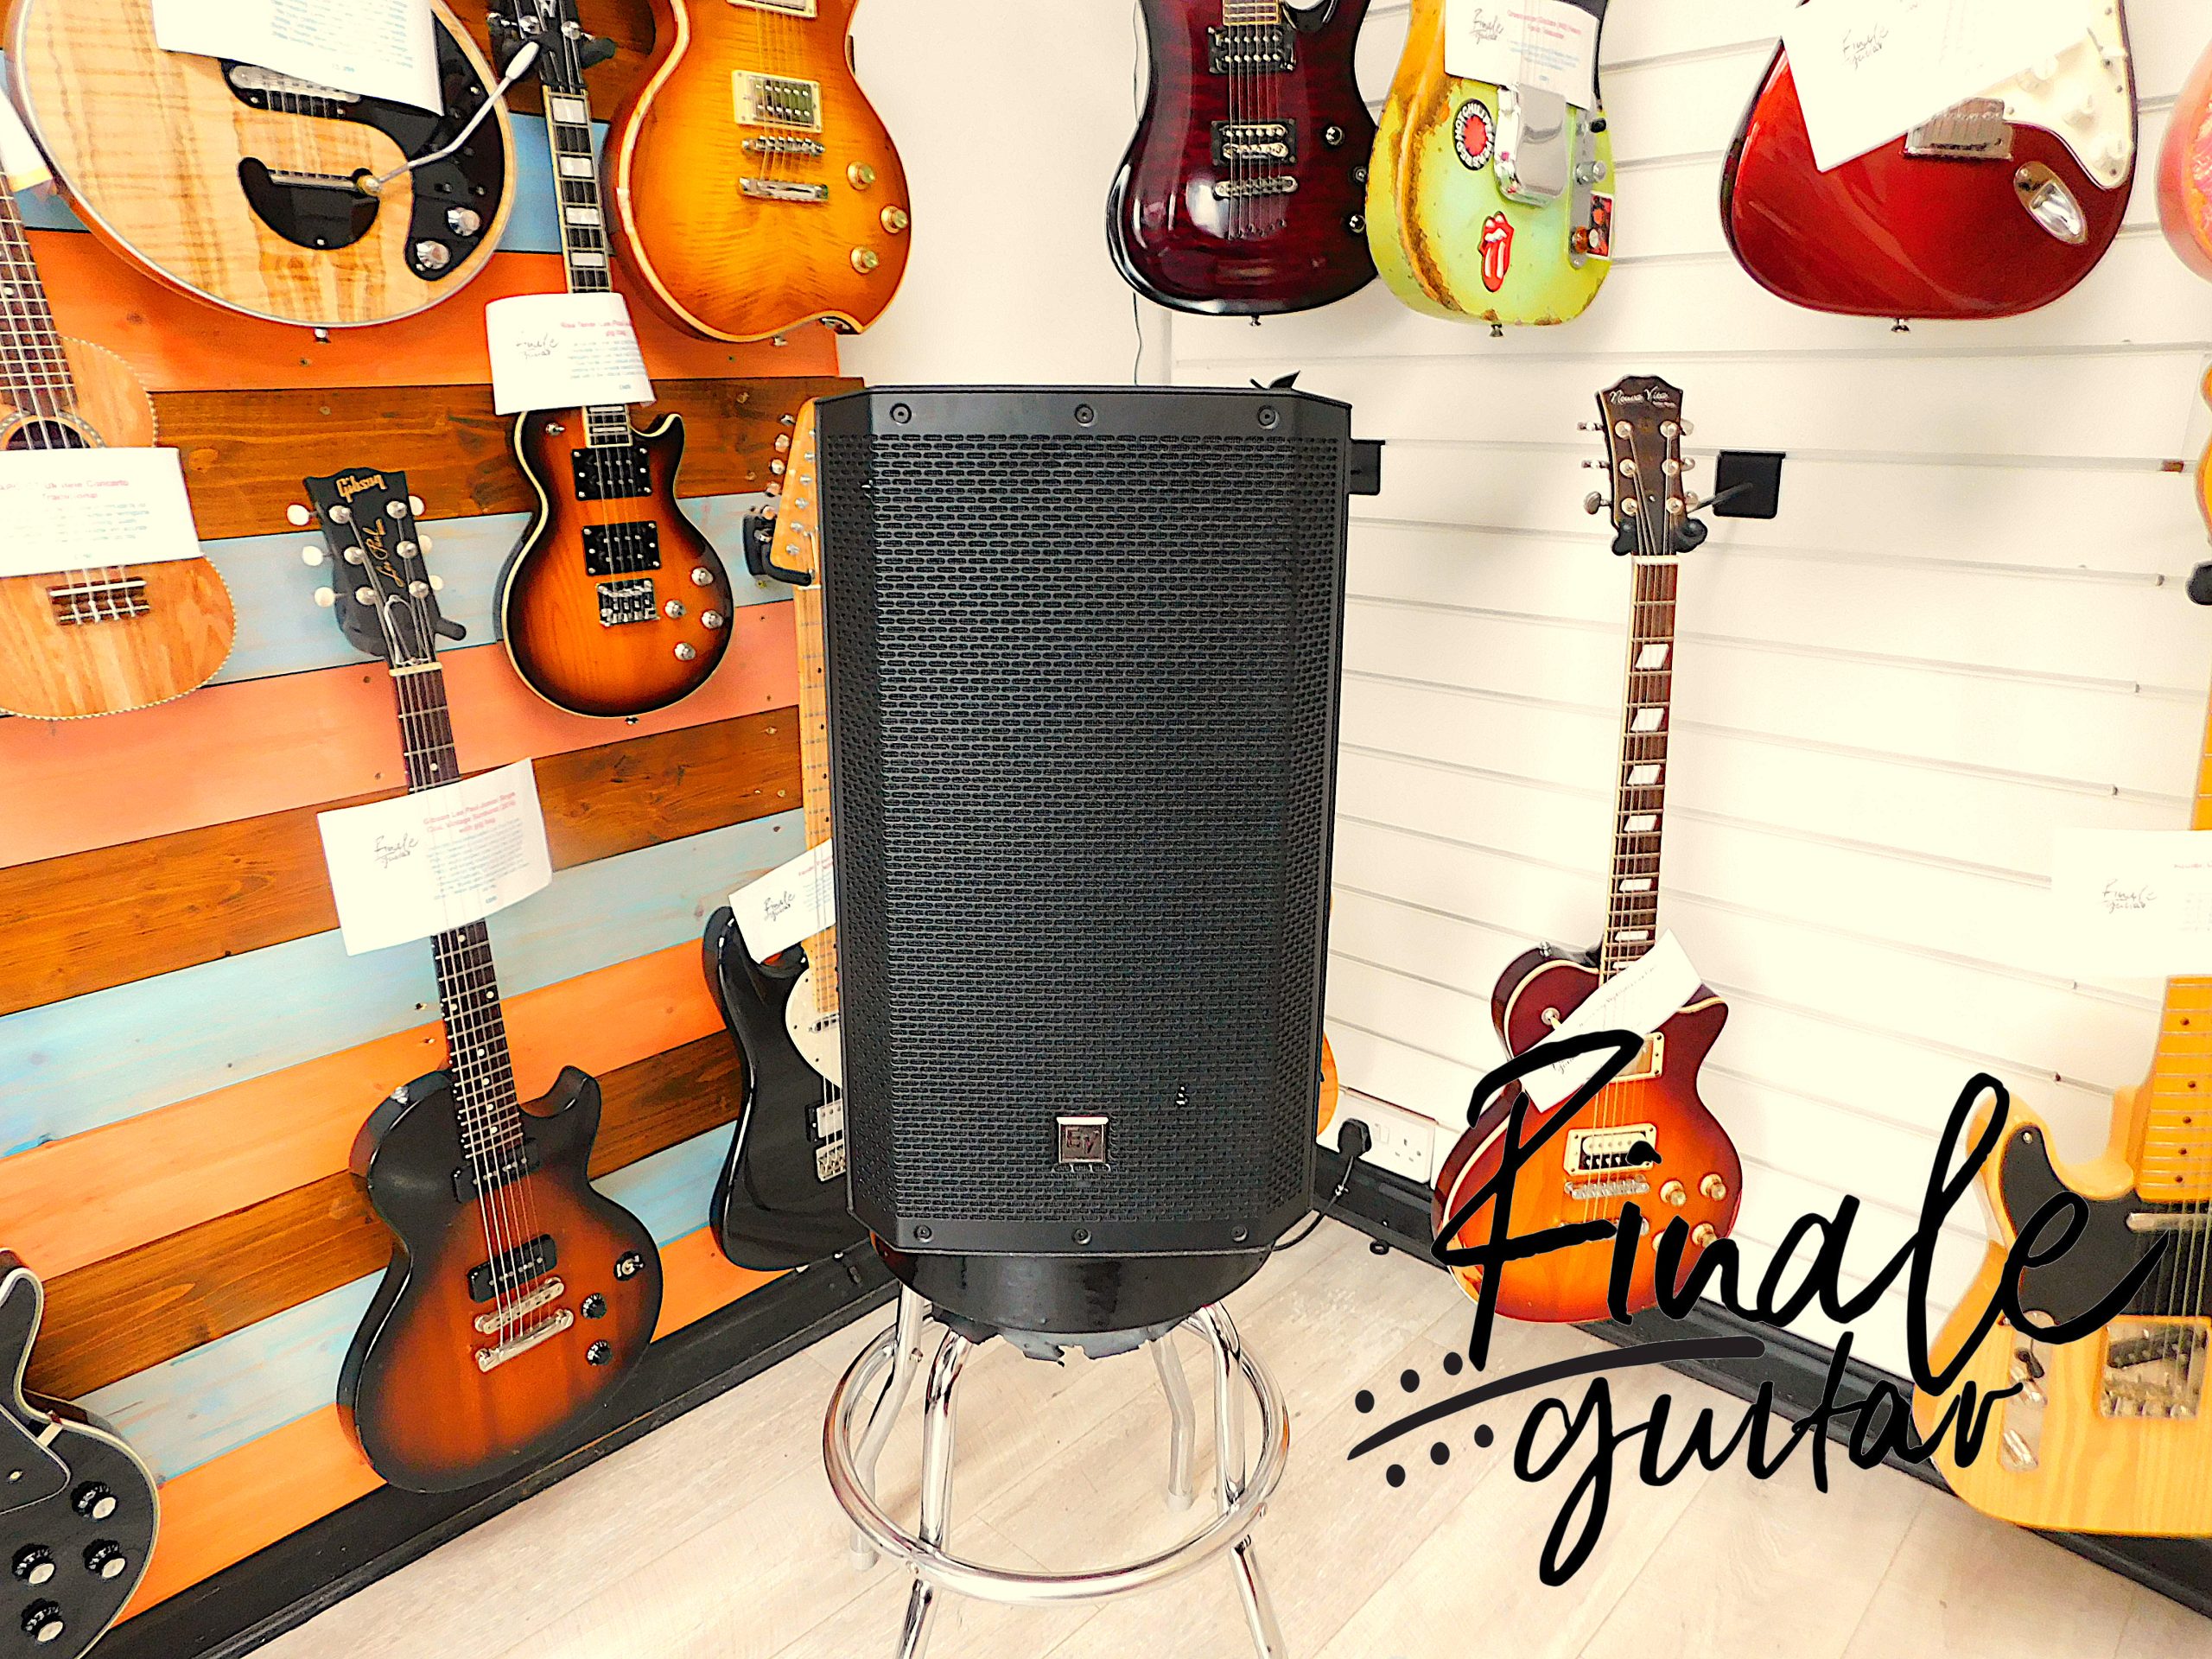 Electro Voice ZLX-12P active PA speaker for sale in our Sheffield guitar shop, Finale Guitar